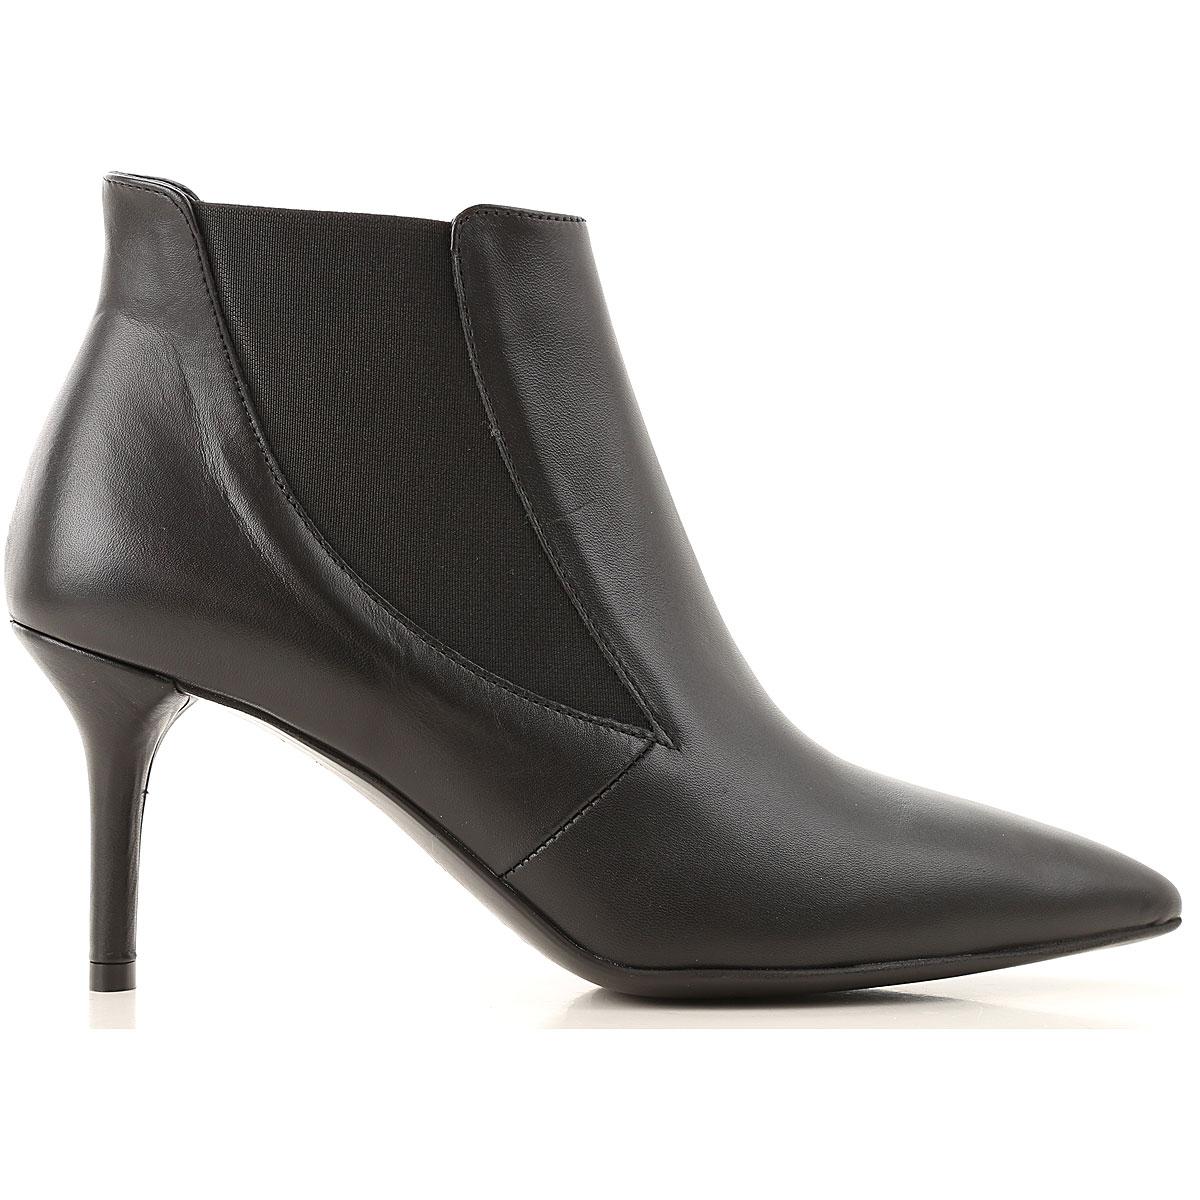 Janet & Janet Leather Pumps & High Heels For Women in Black - Lyst